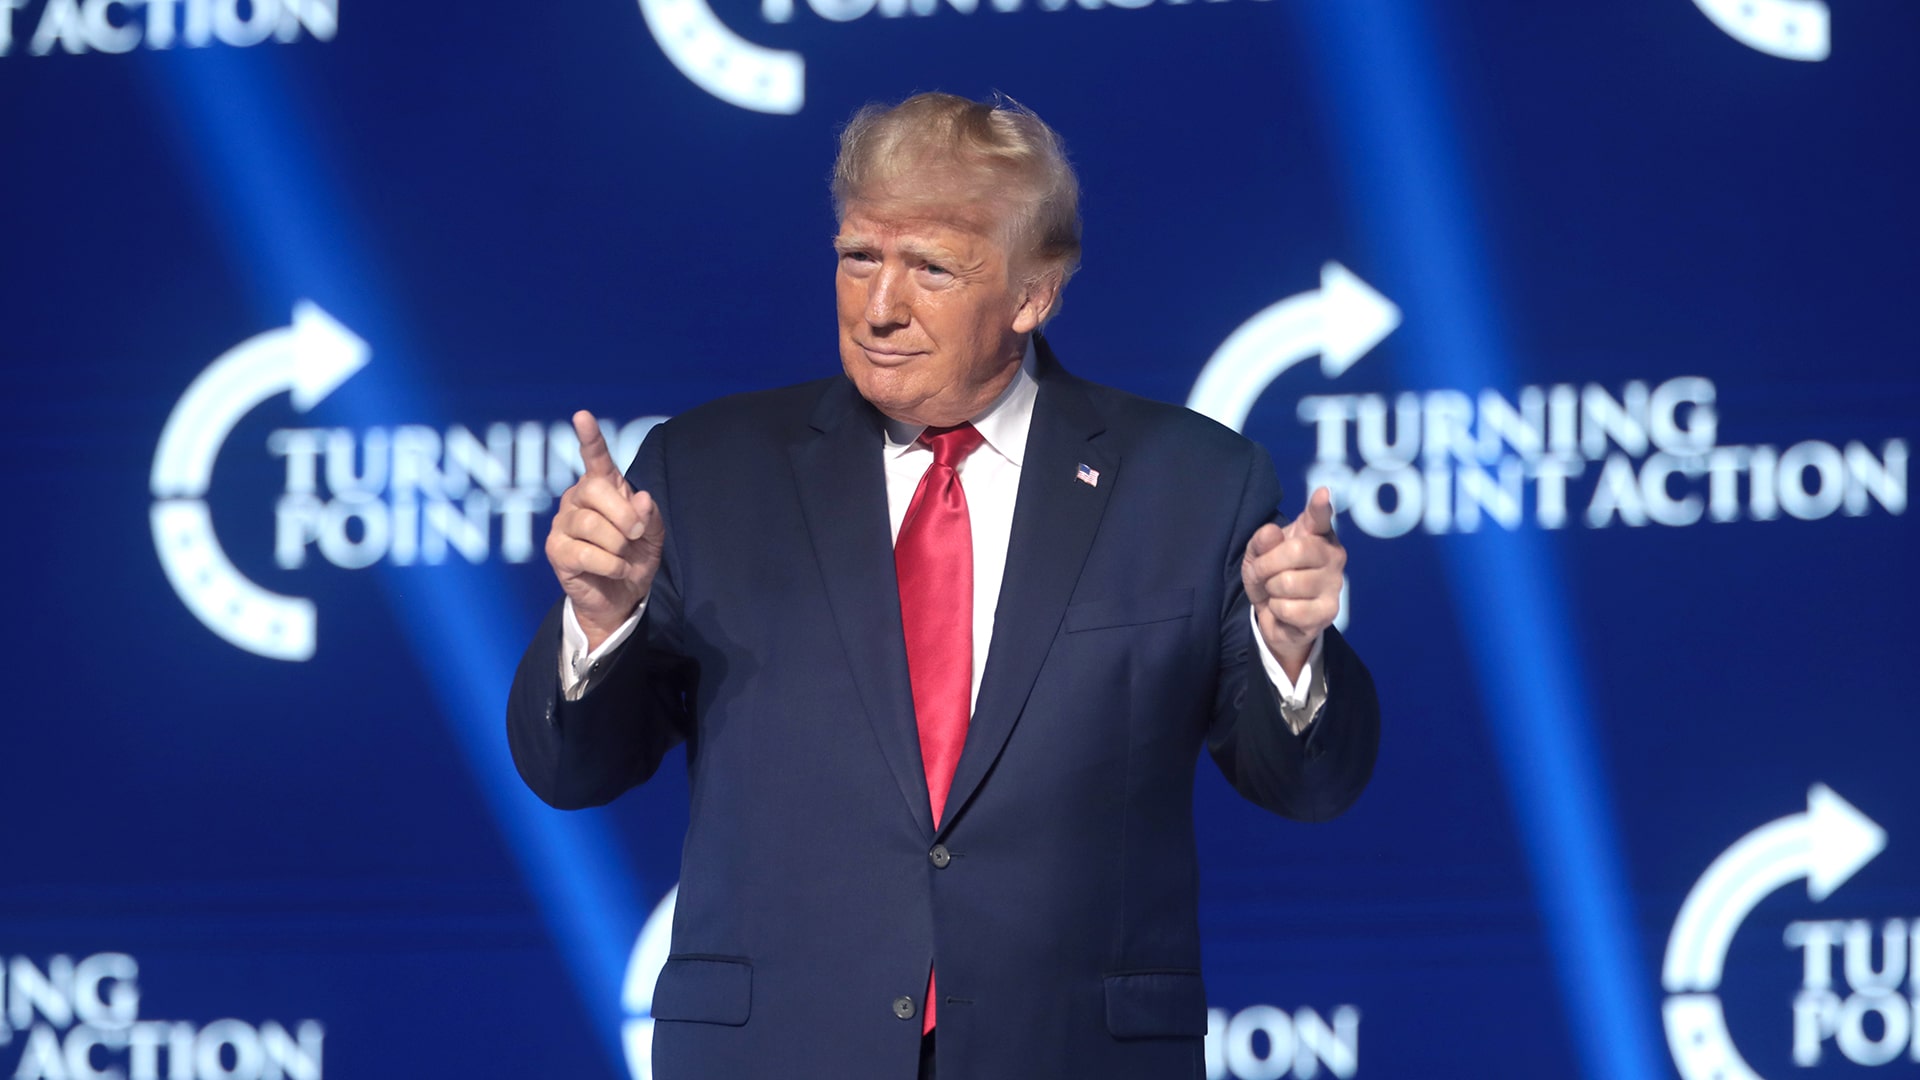 President of the United States, Donald Trump speaking with attendees at the 2022 Student Action Summit at the Tampa Convention Center in Tampa, Florida. Gage Skidmore via Wikimedia Commons.